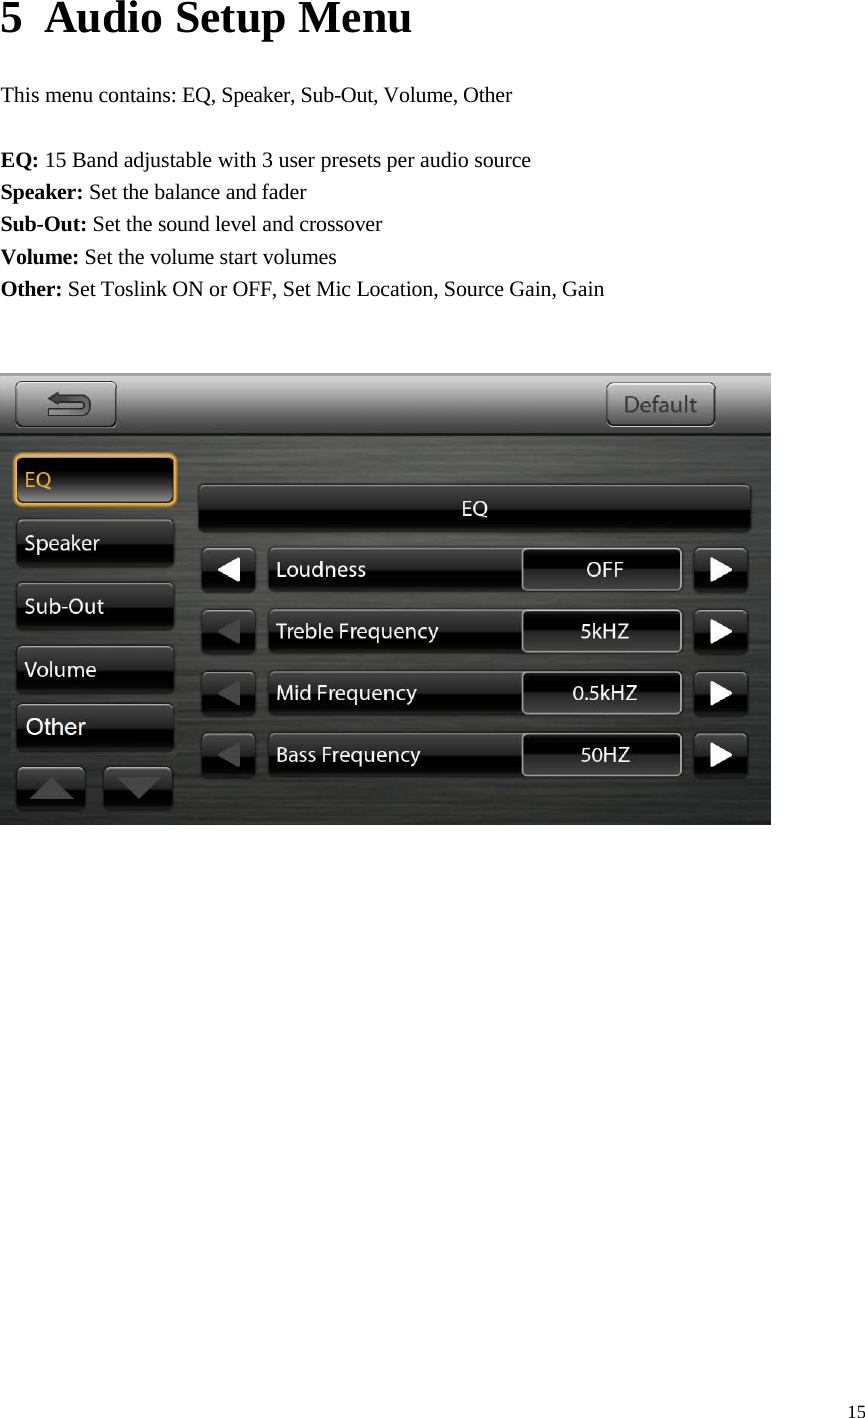 15   5 Audio Setup Menu  This menu contains: EQ, Speaker, Sub-Out, Volume, Other  EQ: 15 Band adjustable with 3 user presets per audio source Speaker: Set the balance and fader Sub-Out: Set the sound level and crossover Volume: Set the volume start volumes  Other: Set Toslink ON or OFF, Set Mic Location, Source Gain, Gain   